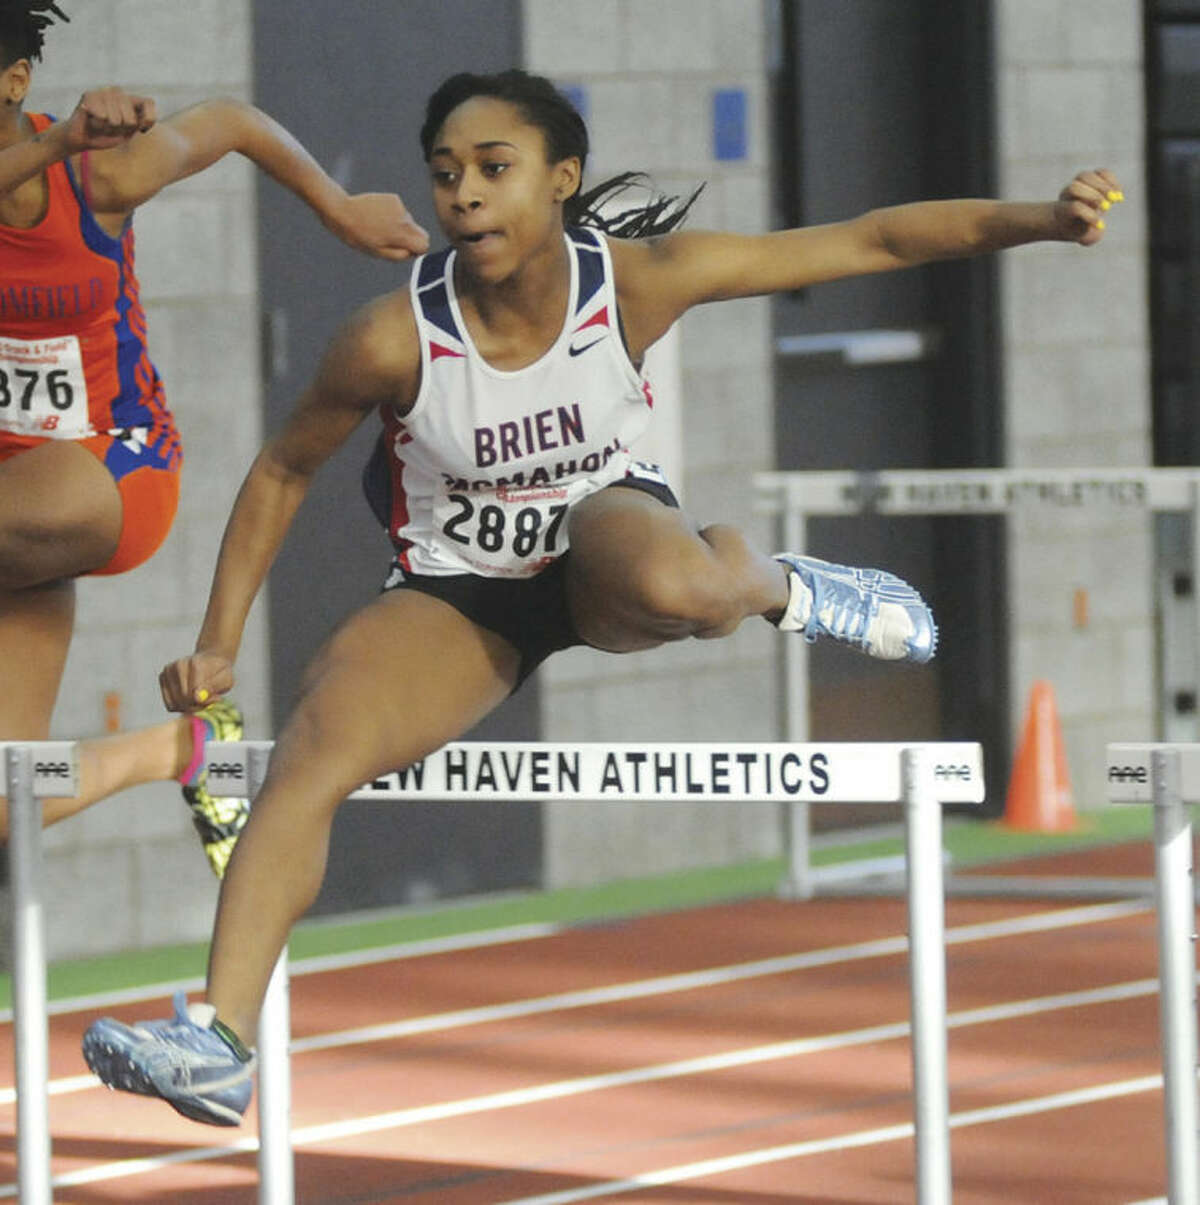 Sarah Boyd of Brien McMahon clears a hurdle during her 55-meter hurdles heat race at Monday's State Open Track Championship meet in New Haven. Boyd went on to finish second in the final. Hour photo/ John Nash